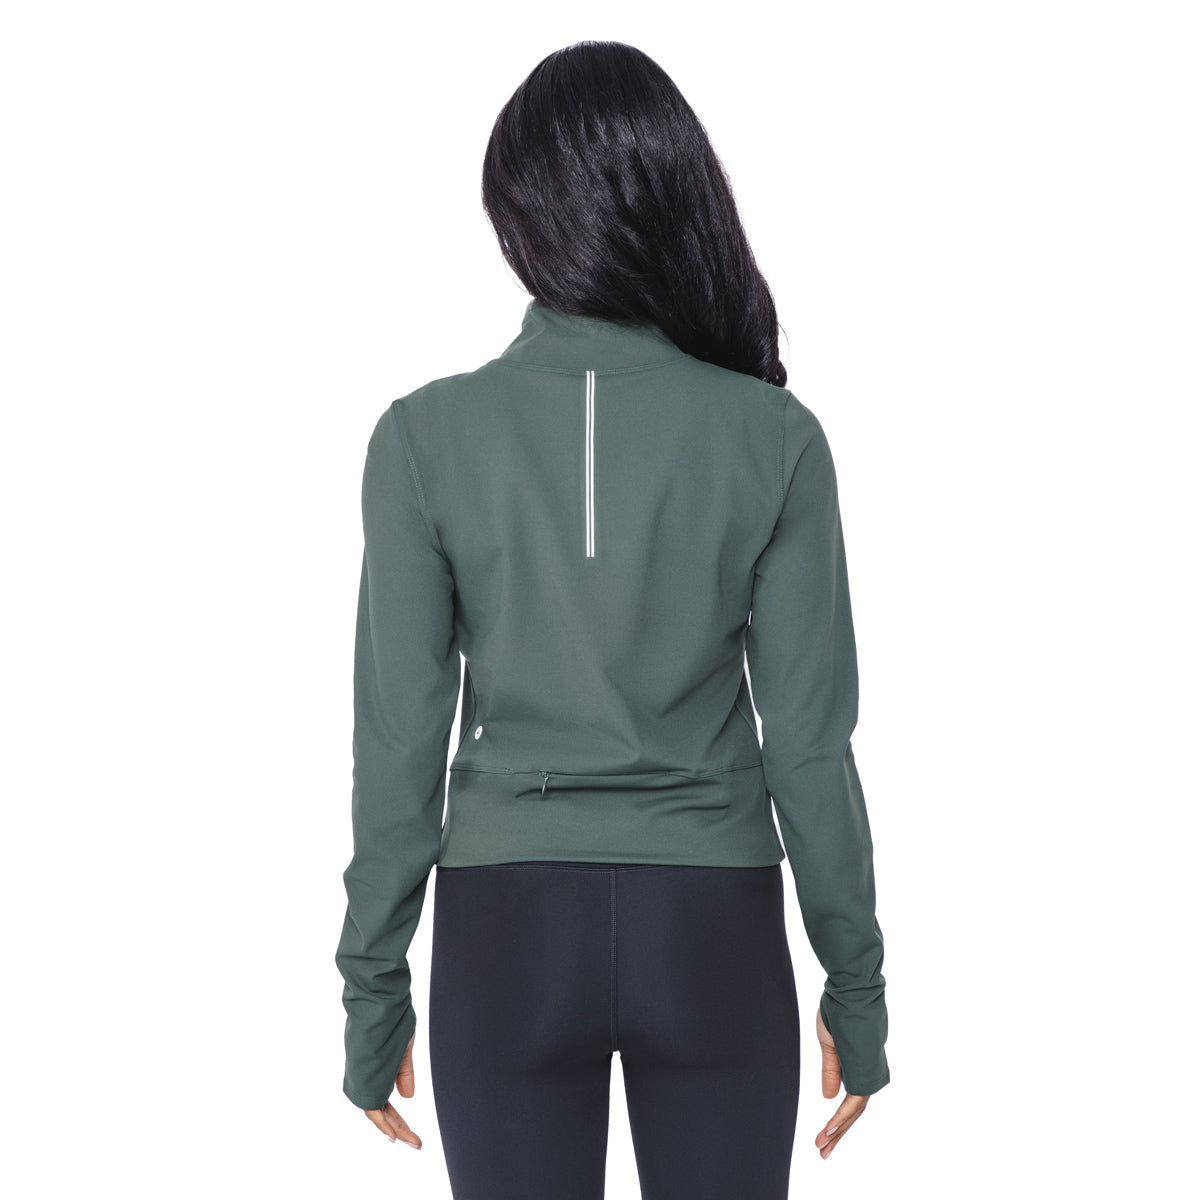 90 Degree By Reflex High Low Full Zip Jacket With Side Pockets - Sage -  Medium